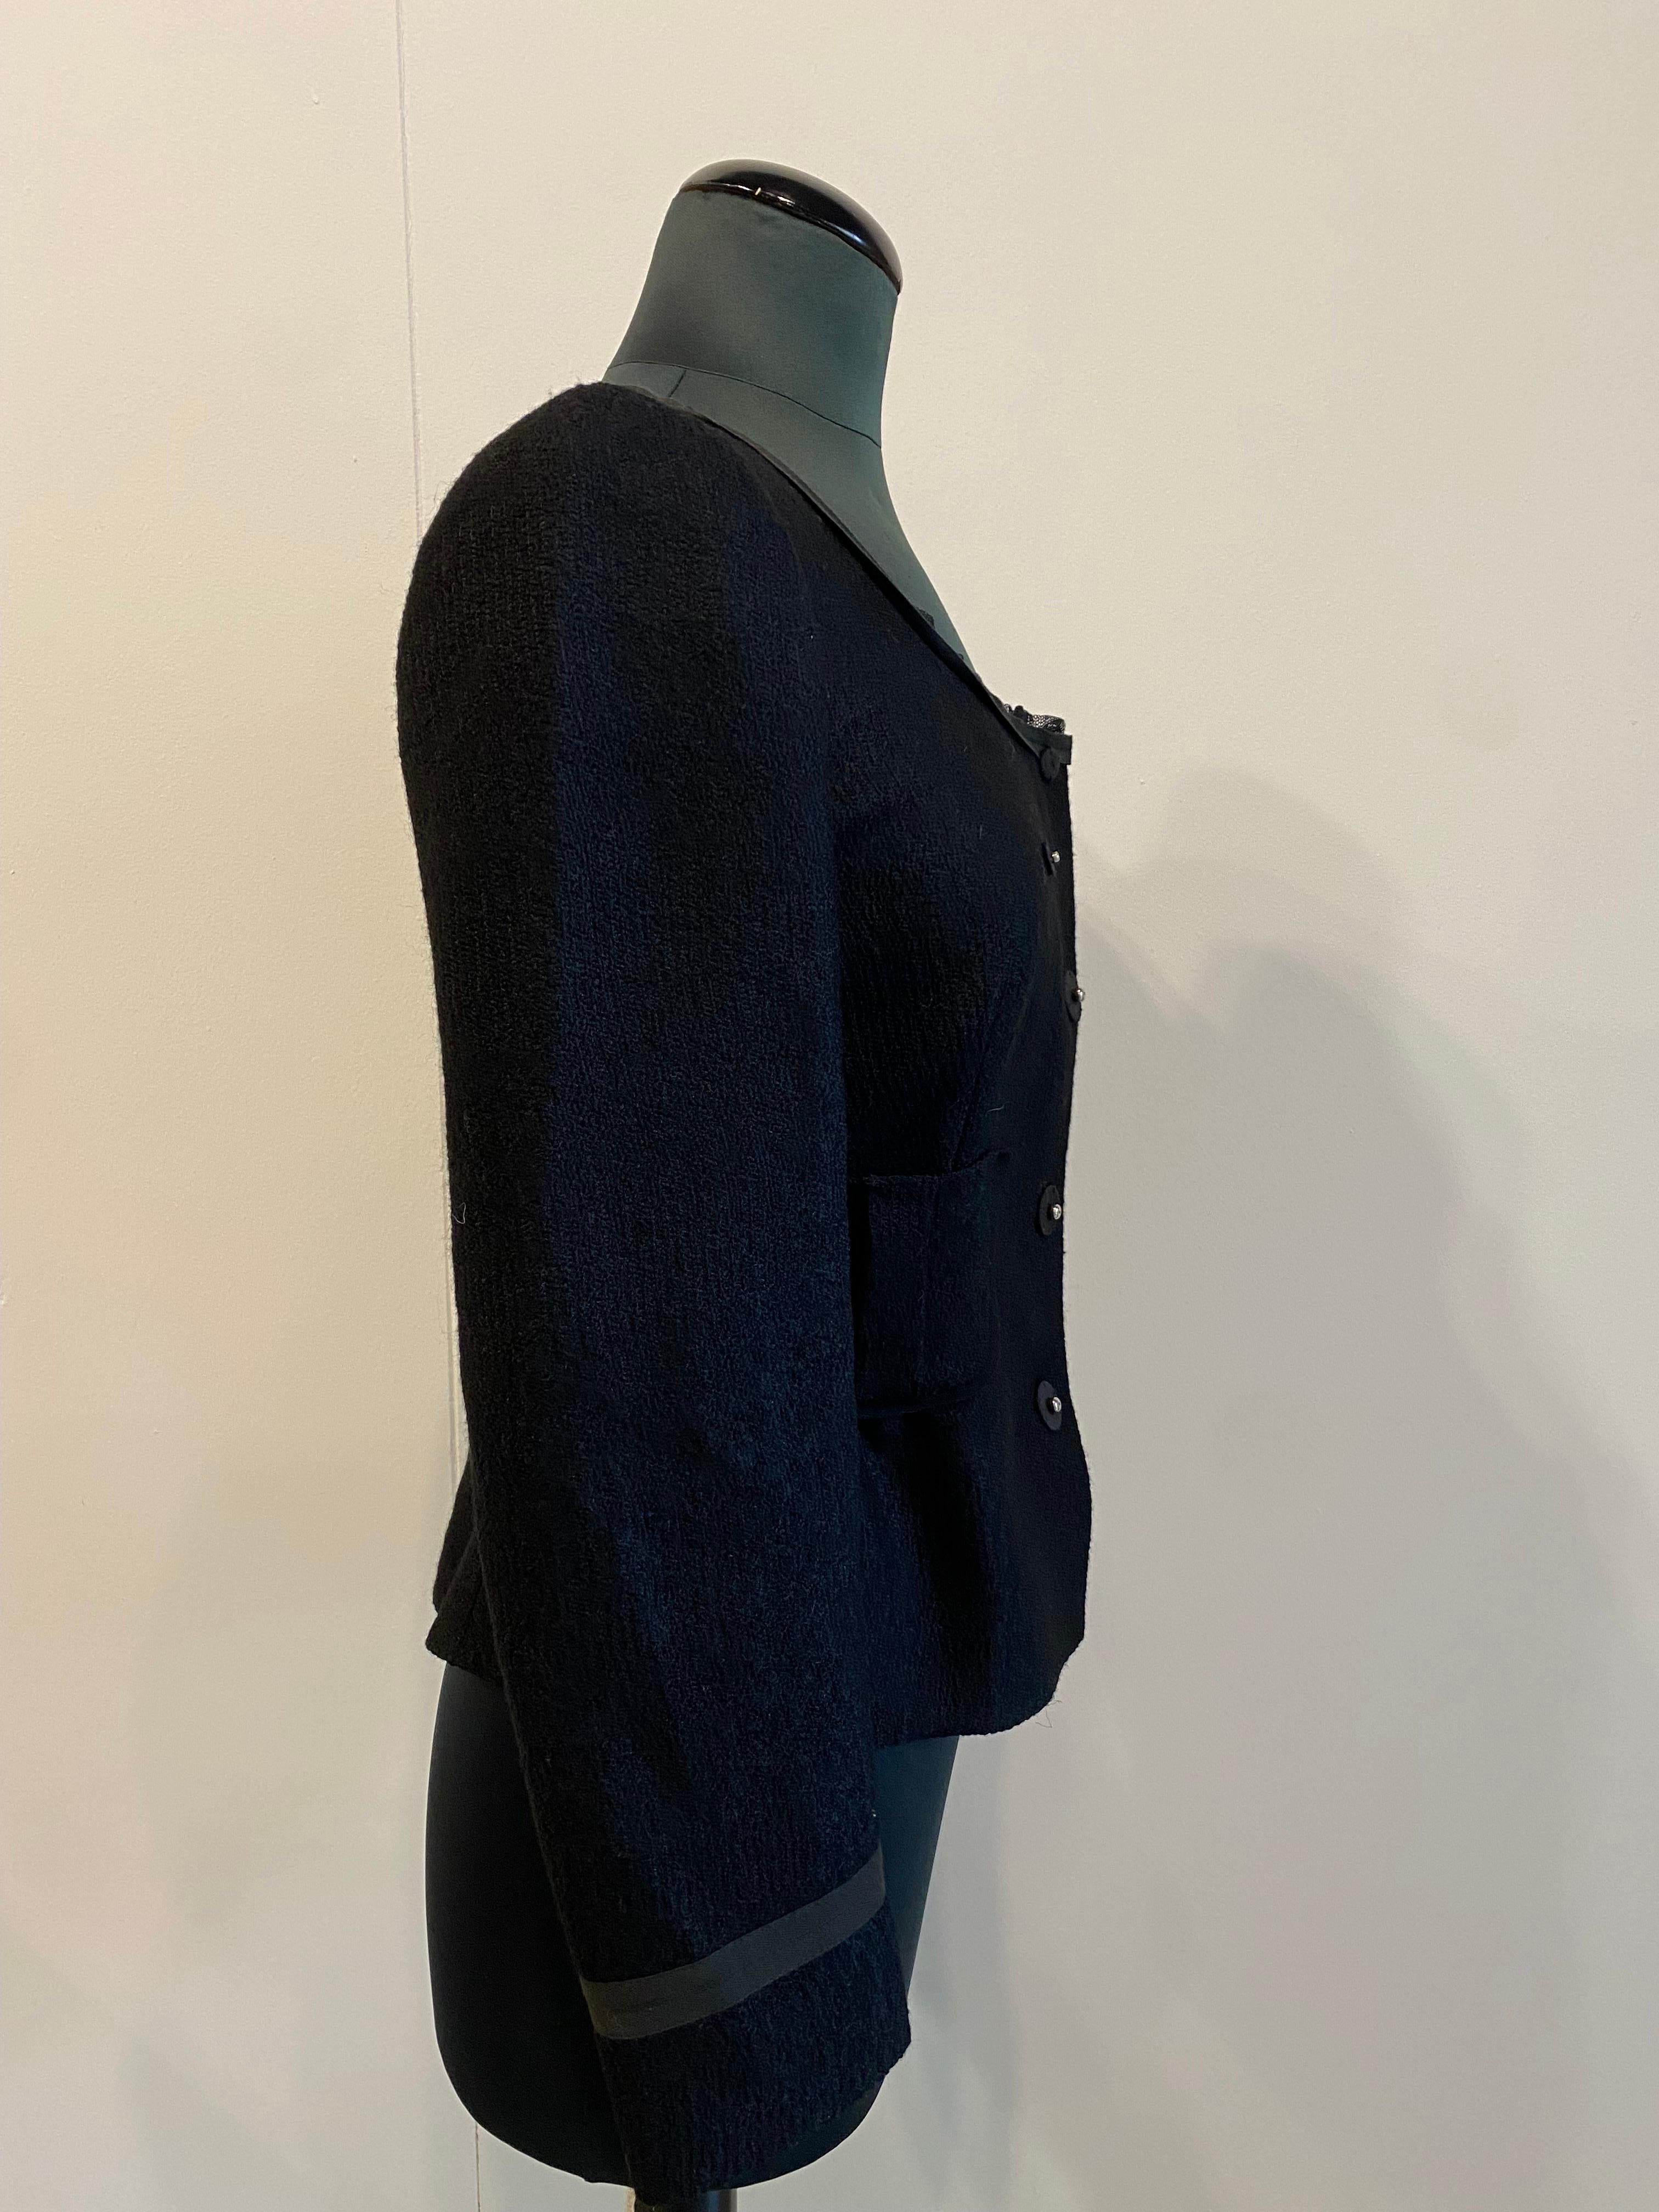 Wool Prada Jacket In Excellent Condition For Sale In Carnate, IT